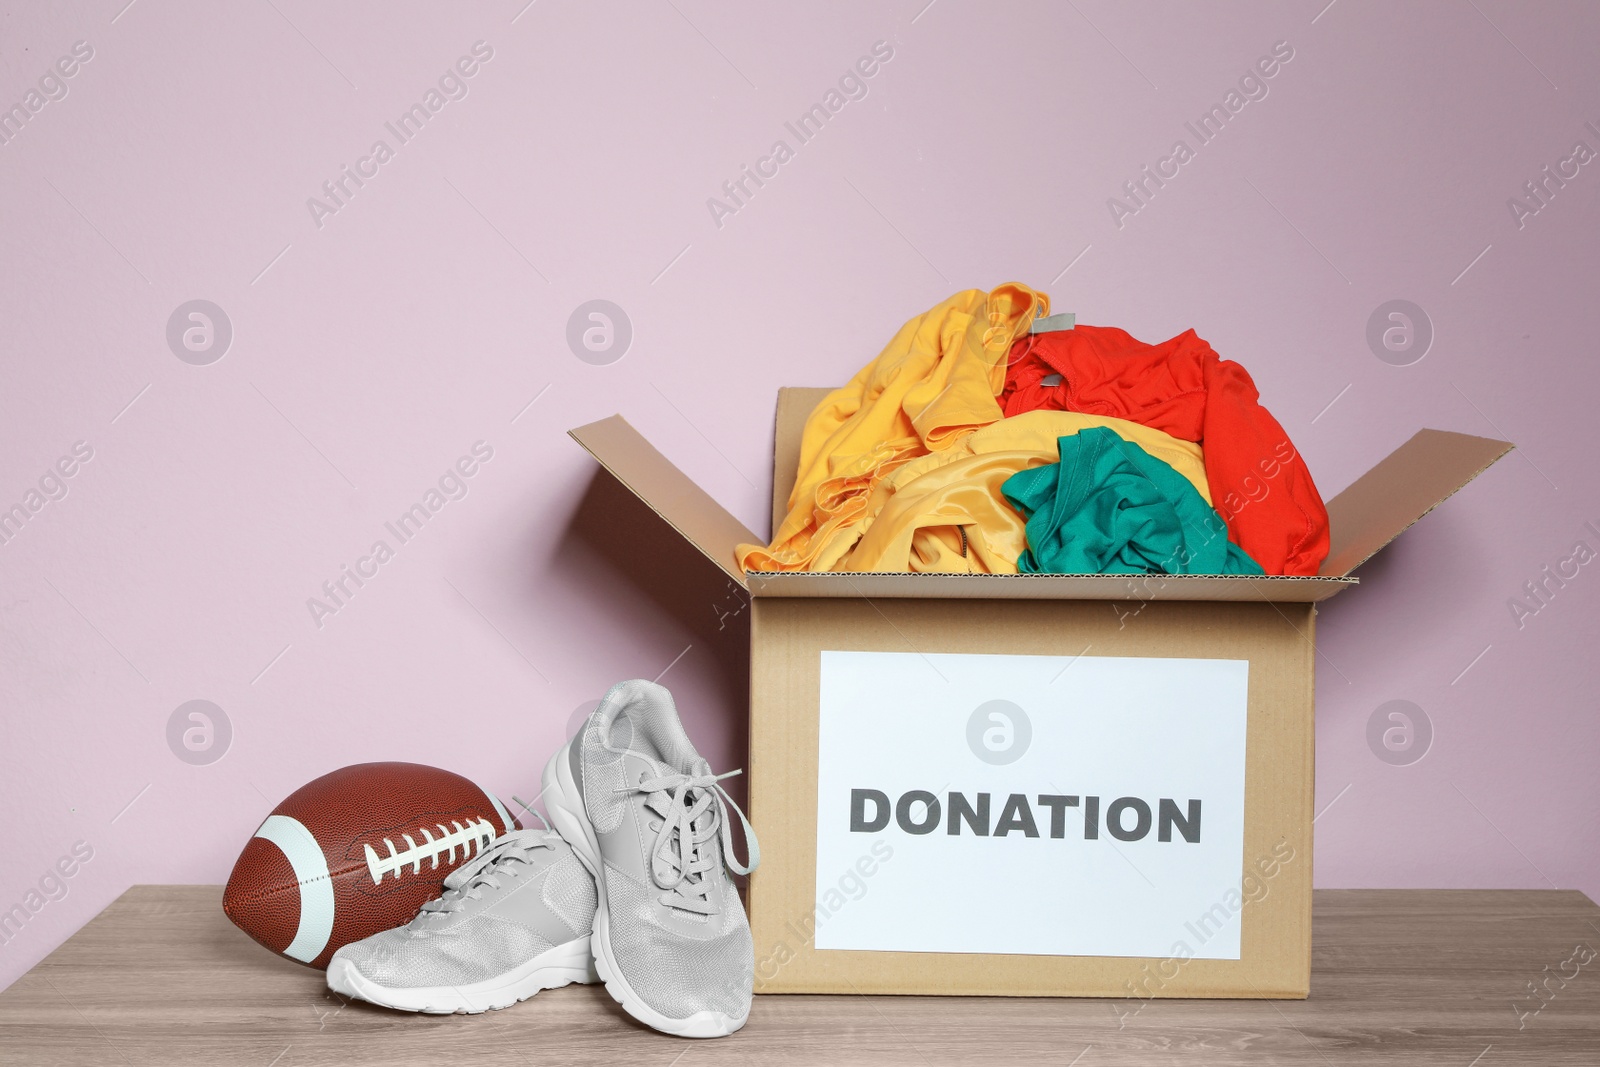 Photo of Donation box with clothes, shoes and rugby ball on table against color background